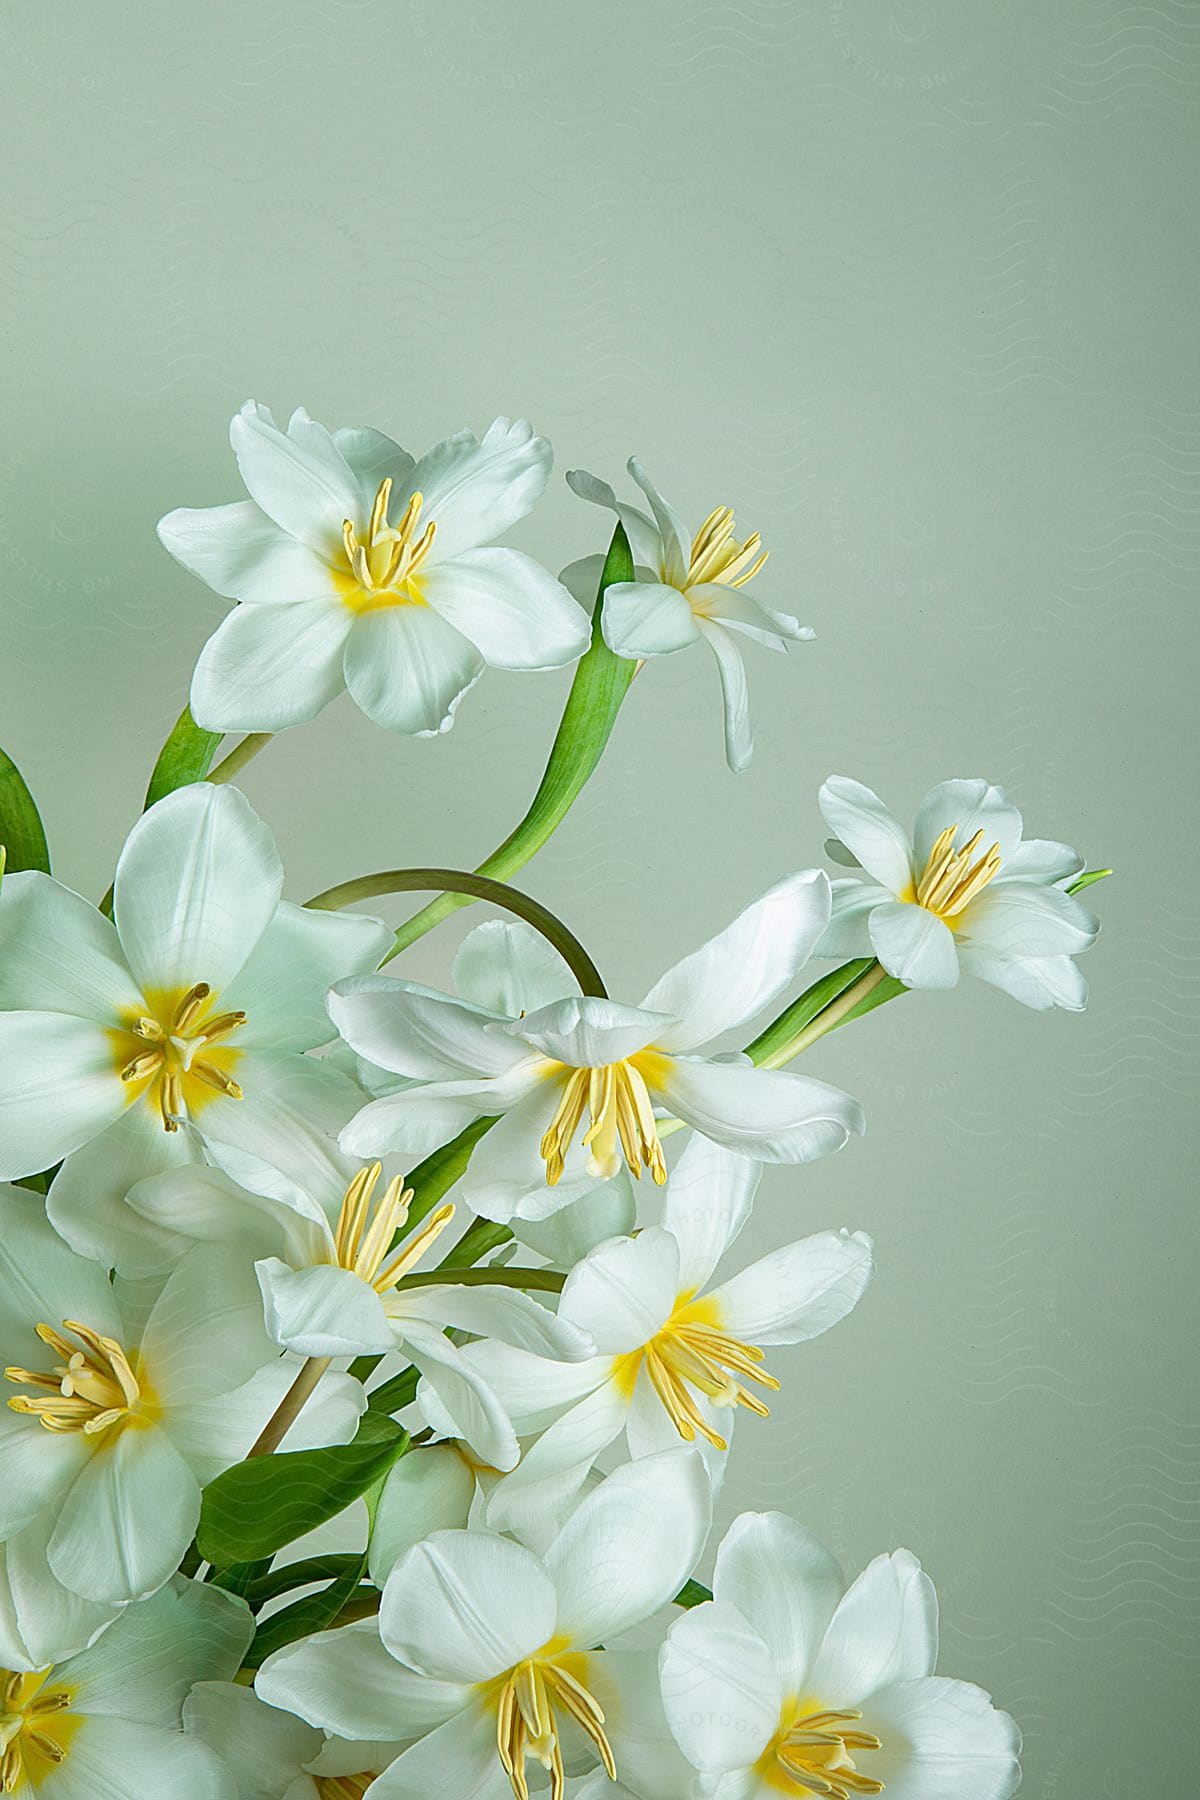 A cluster of white flowers with yellow stamens, standing out against a soft green background.